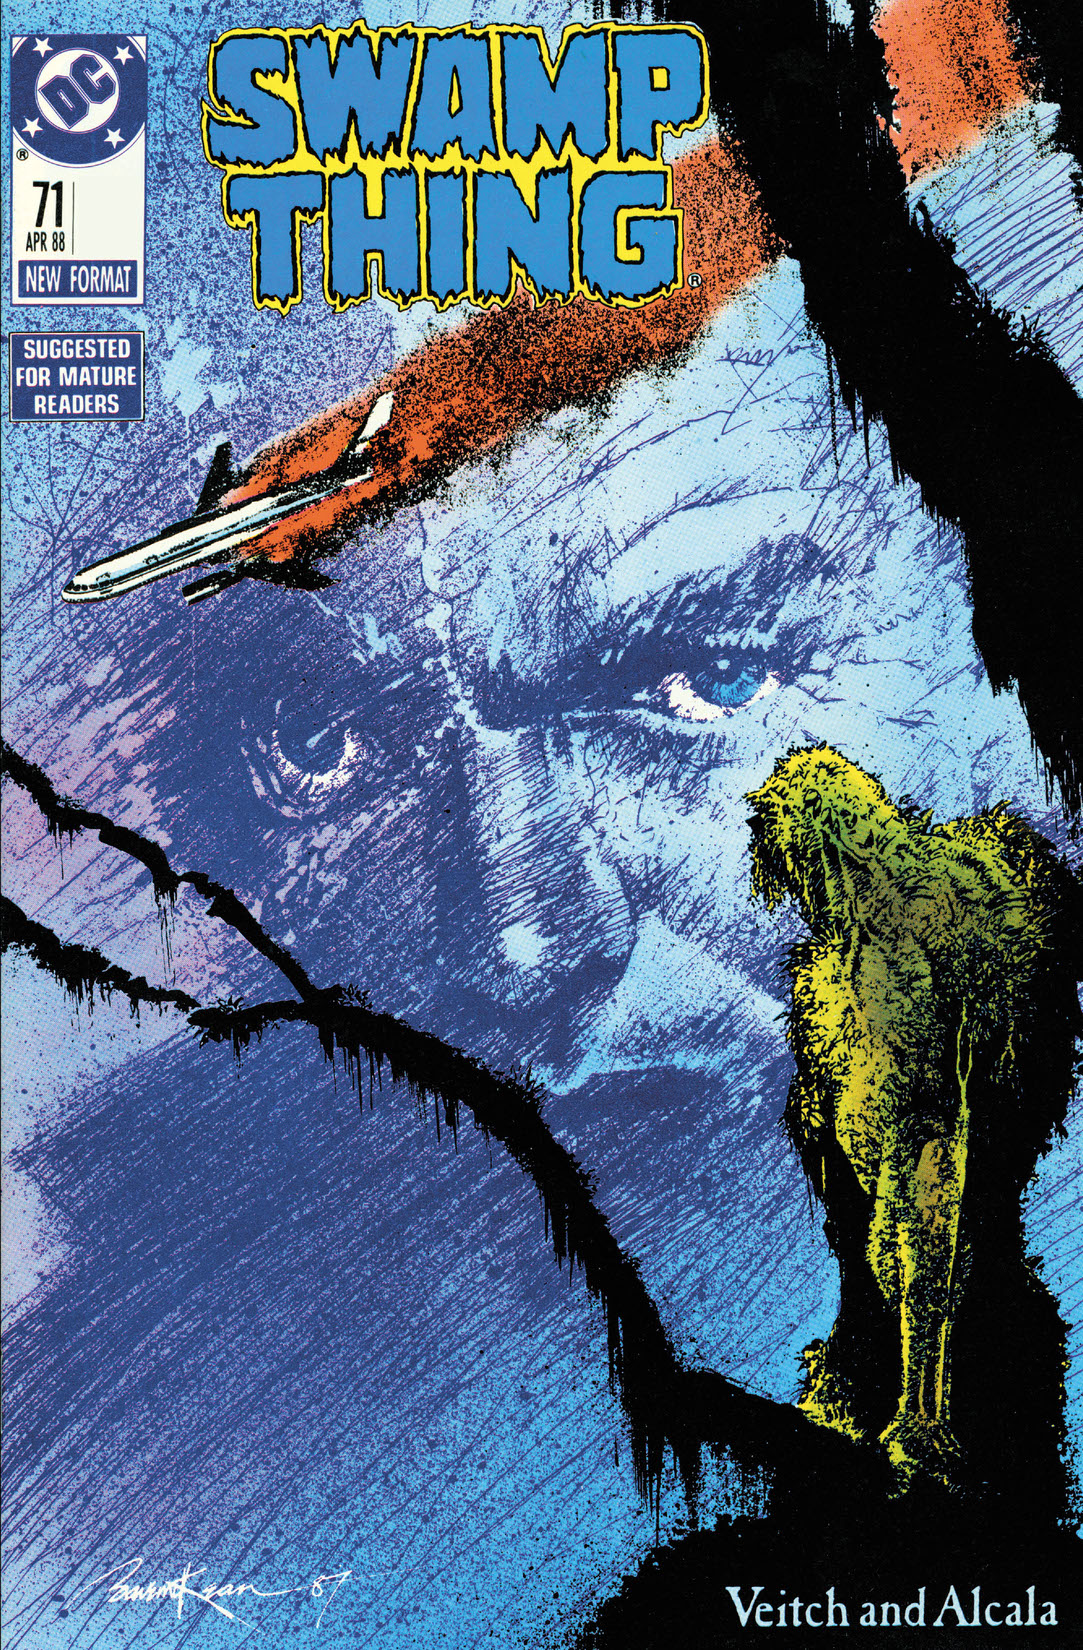 Swamp Thing (1985-1996) #71 preview images